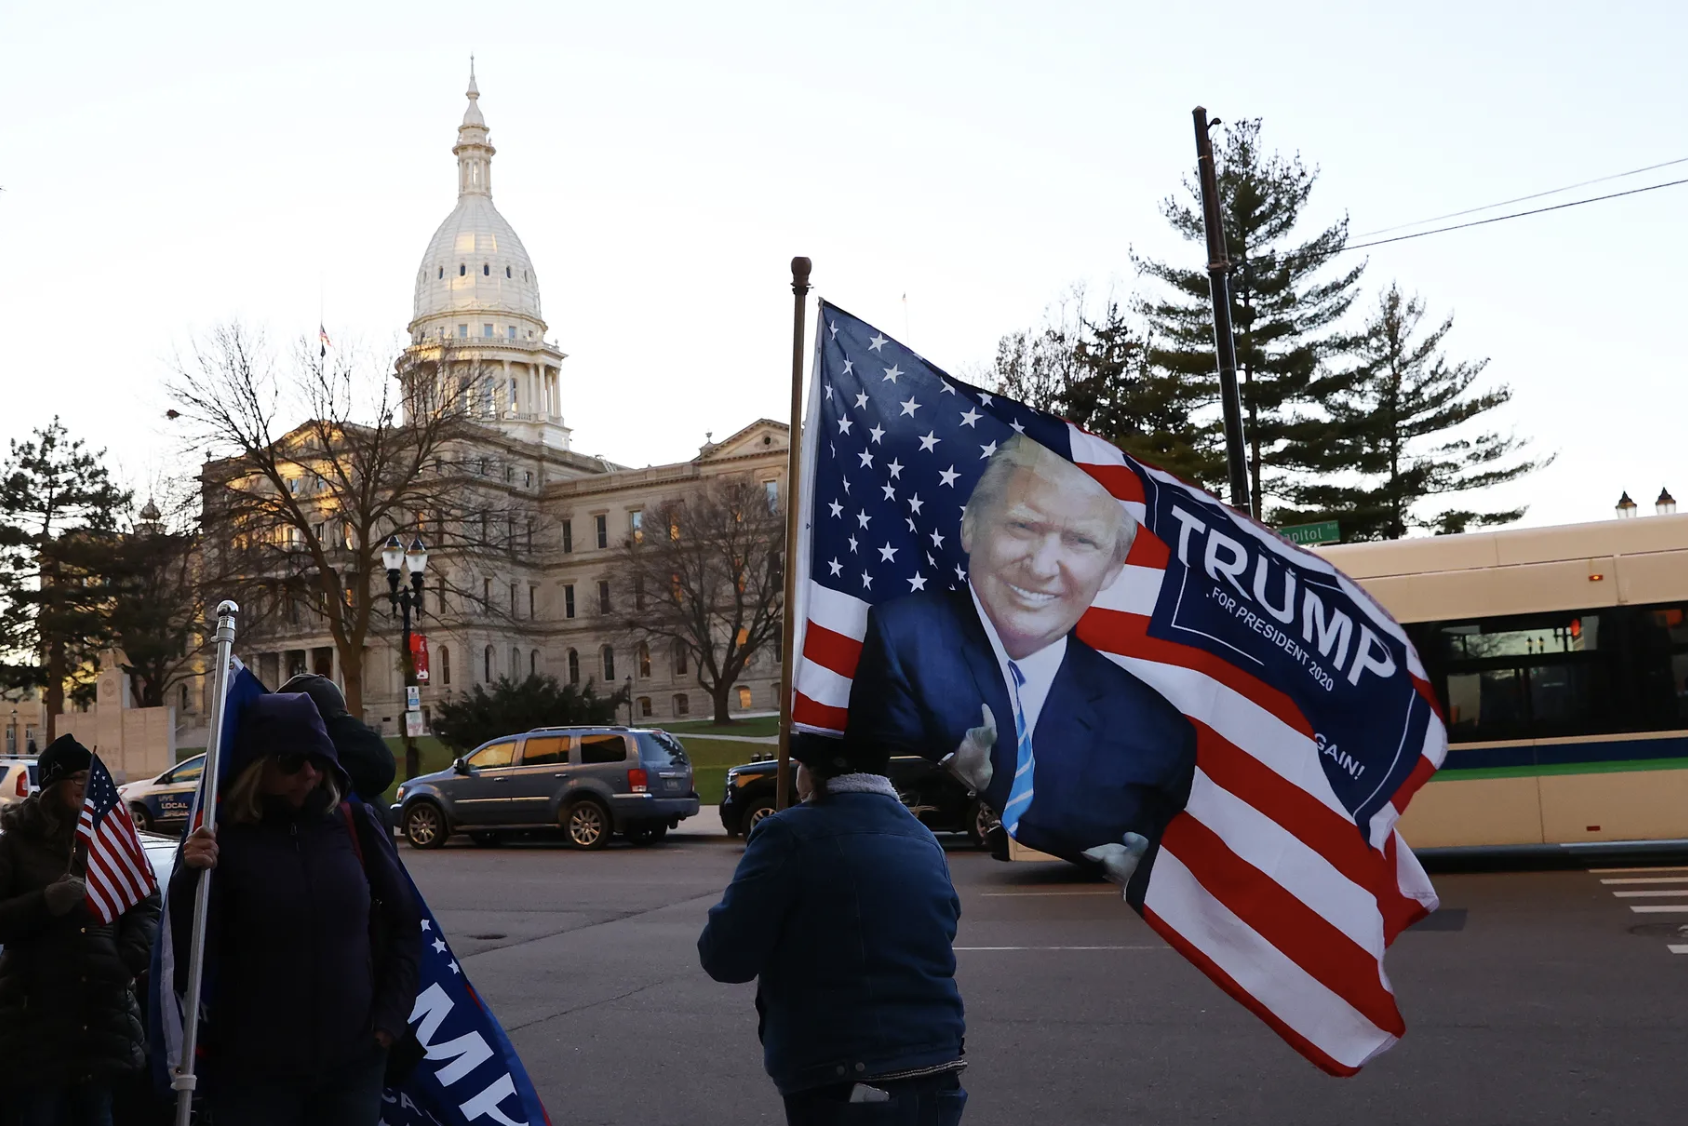 Supporters of former President Donald Trump gather outside the Michigan House building before Trump’s personal attorney Rudy Giuliani testified on December 2, 2020, in Lansing, Michigan. Rey Del Rio/Getty Images